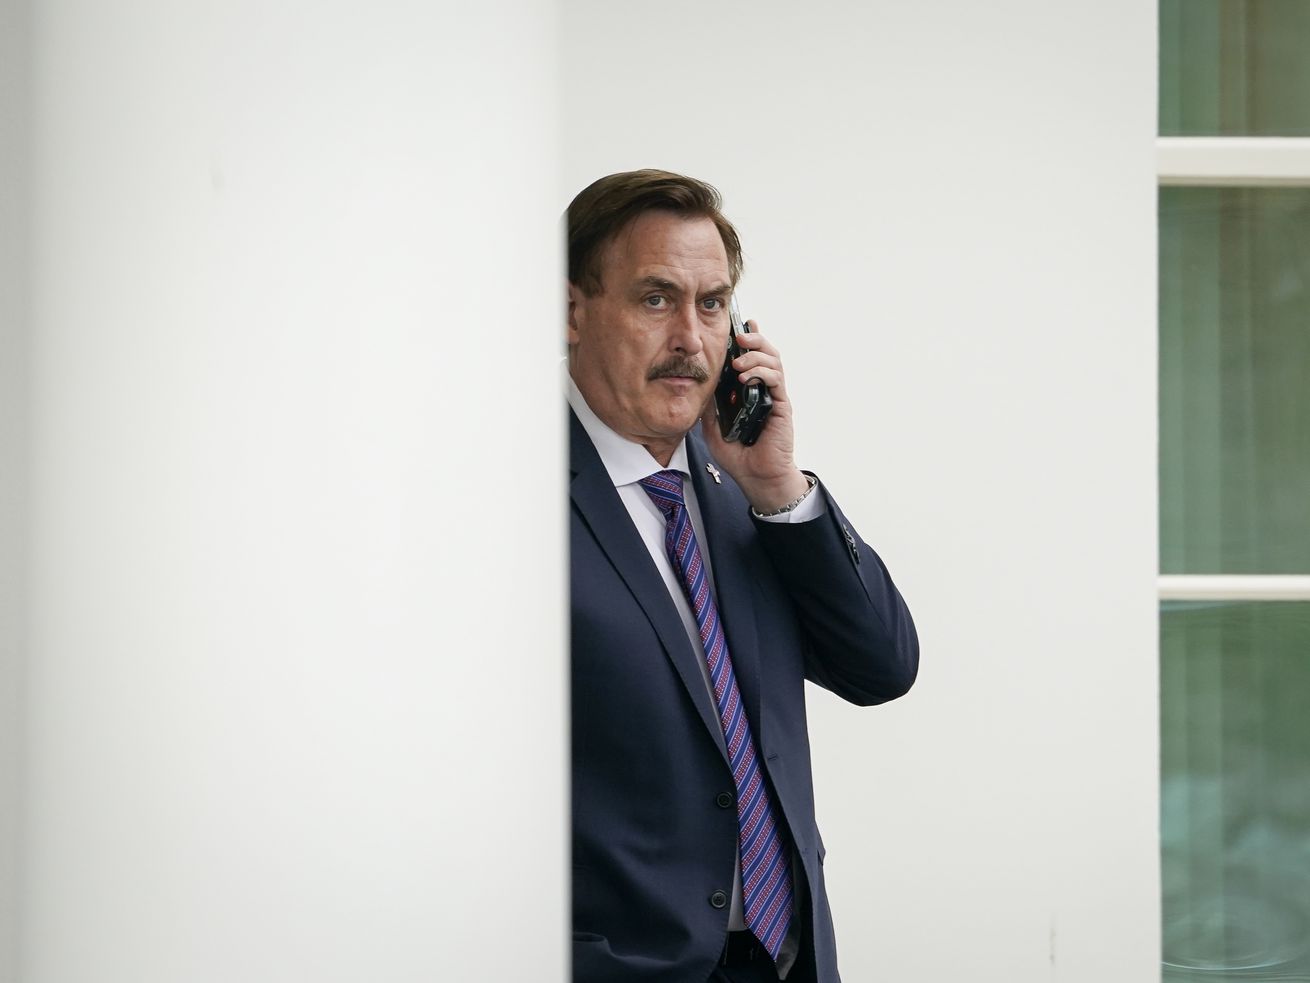 Newsmax just canceled MyPillow’s Mike Lindell live on air